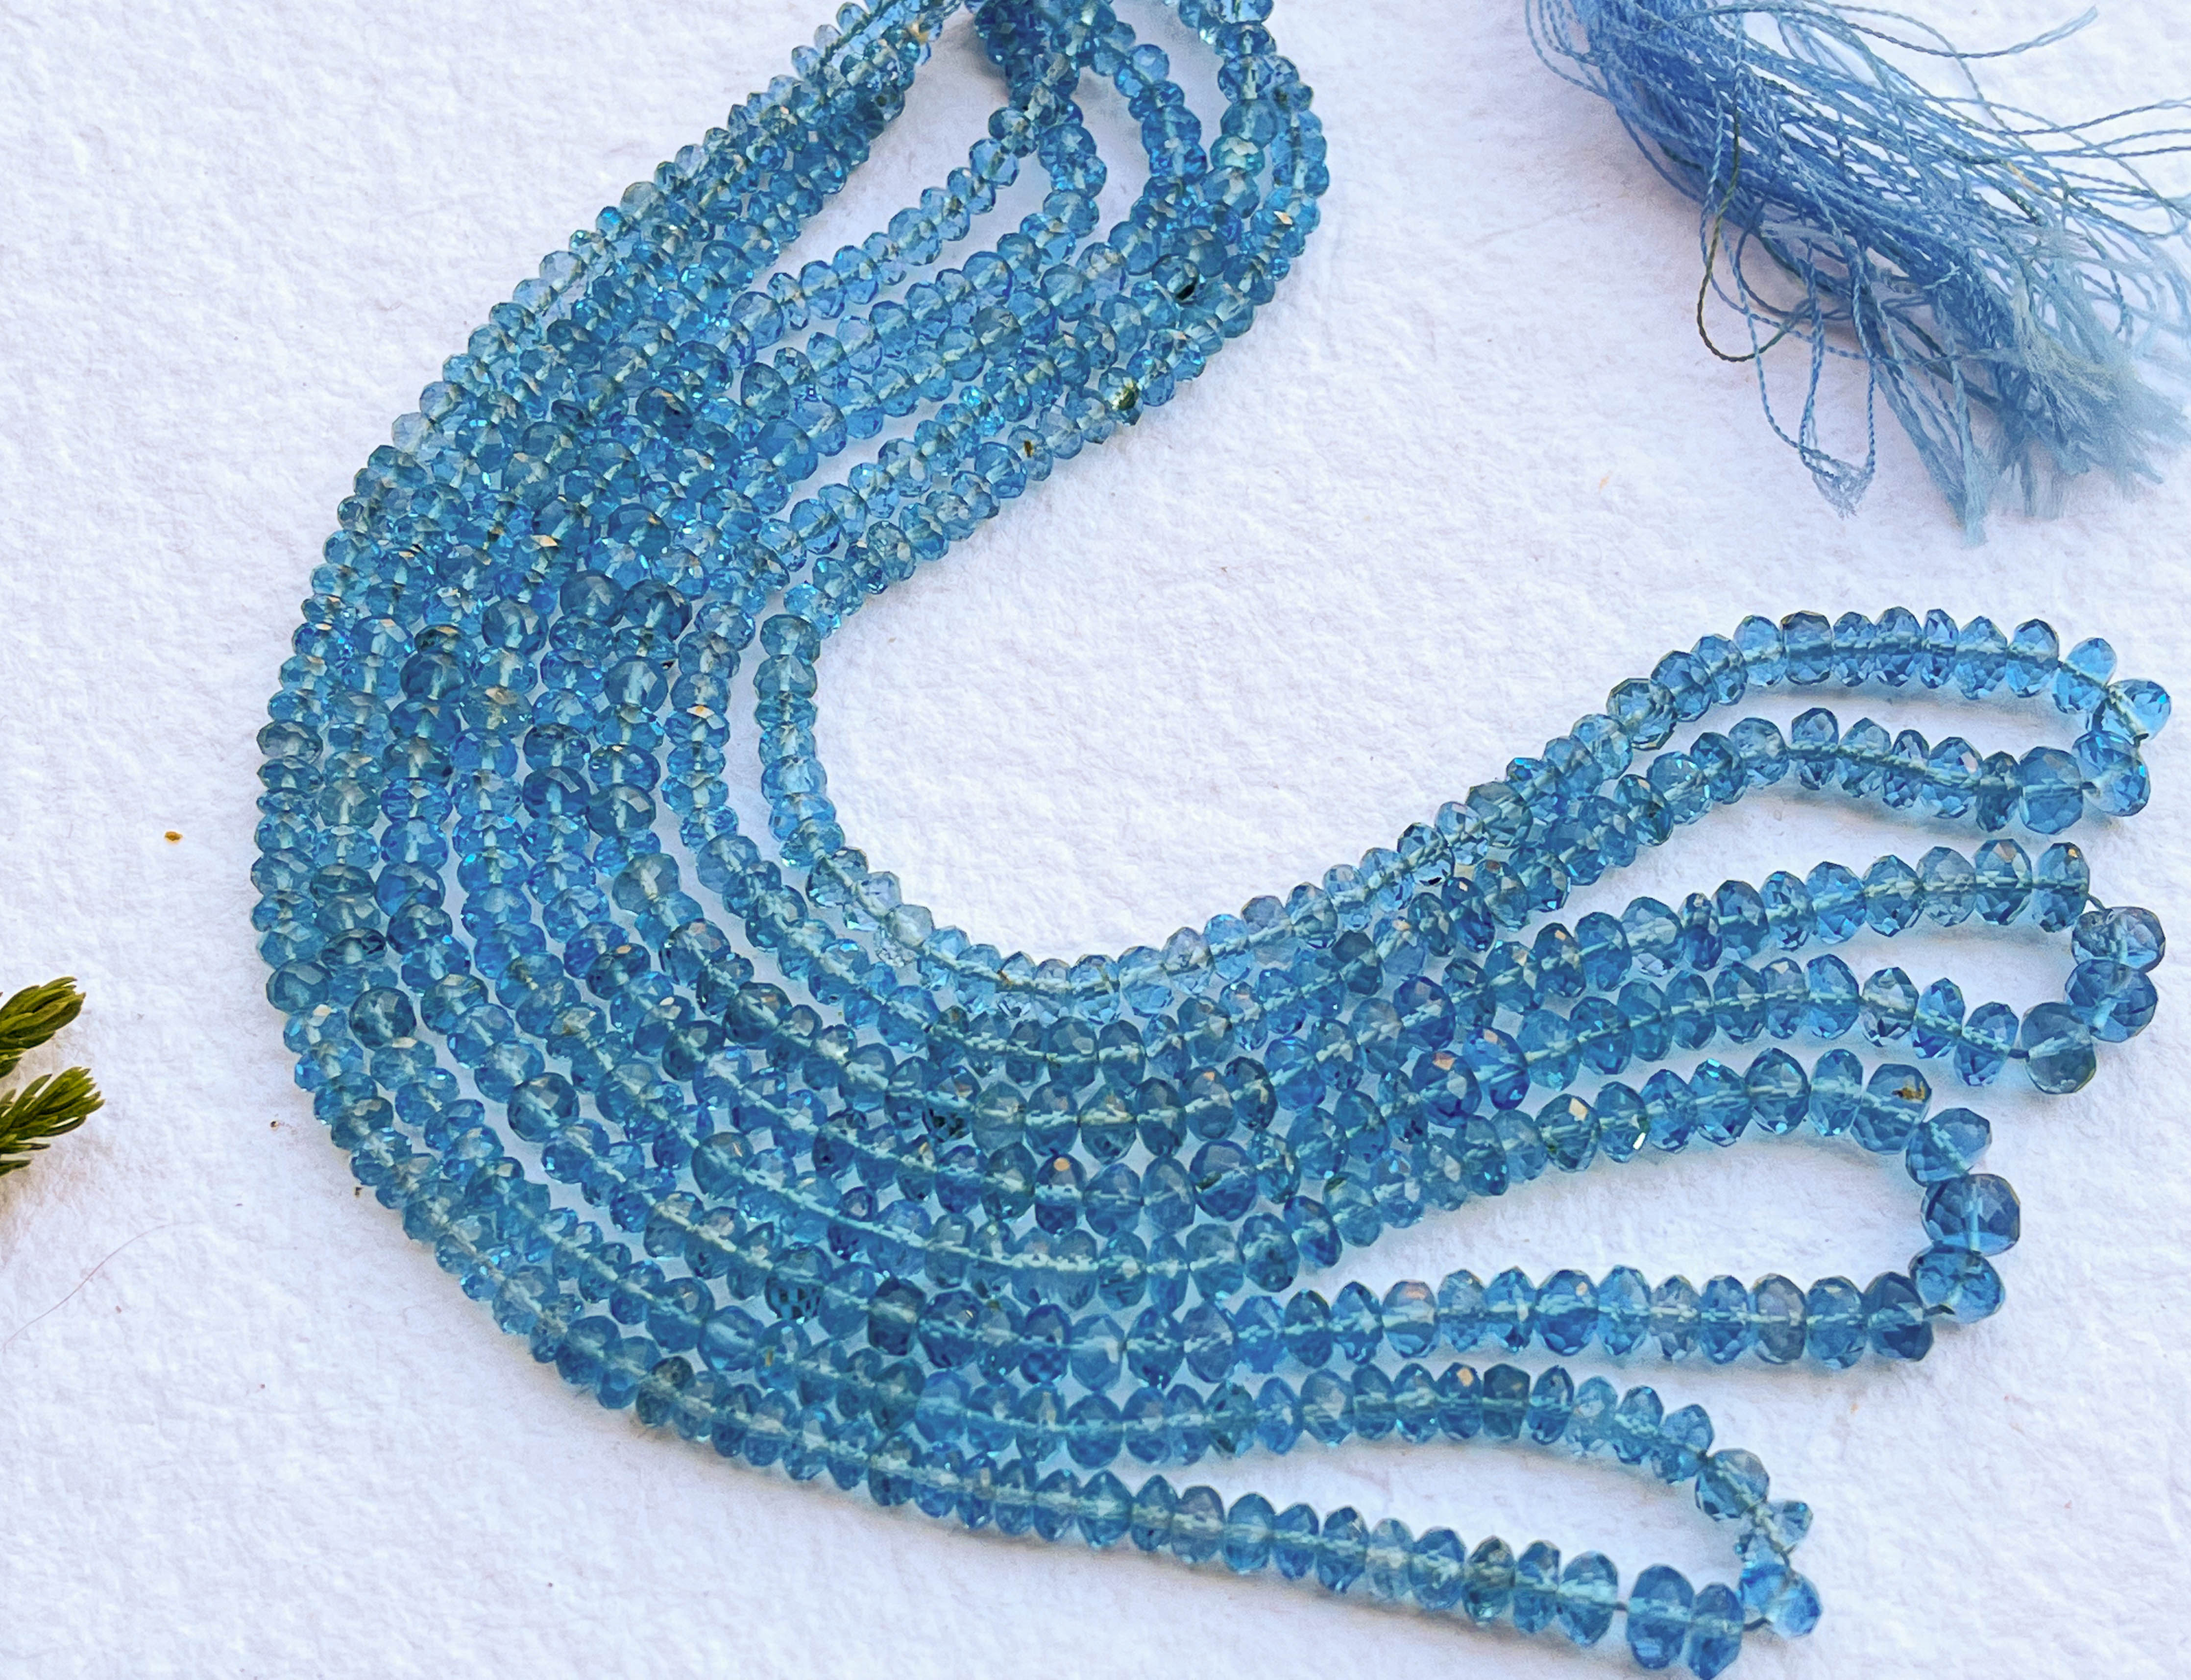 Swiss Blue Topaz Rondelle Shape Faceted Beads Beadsforyourjewelry